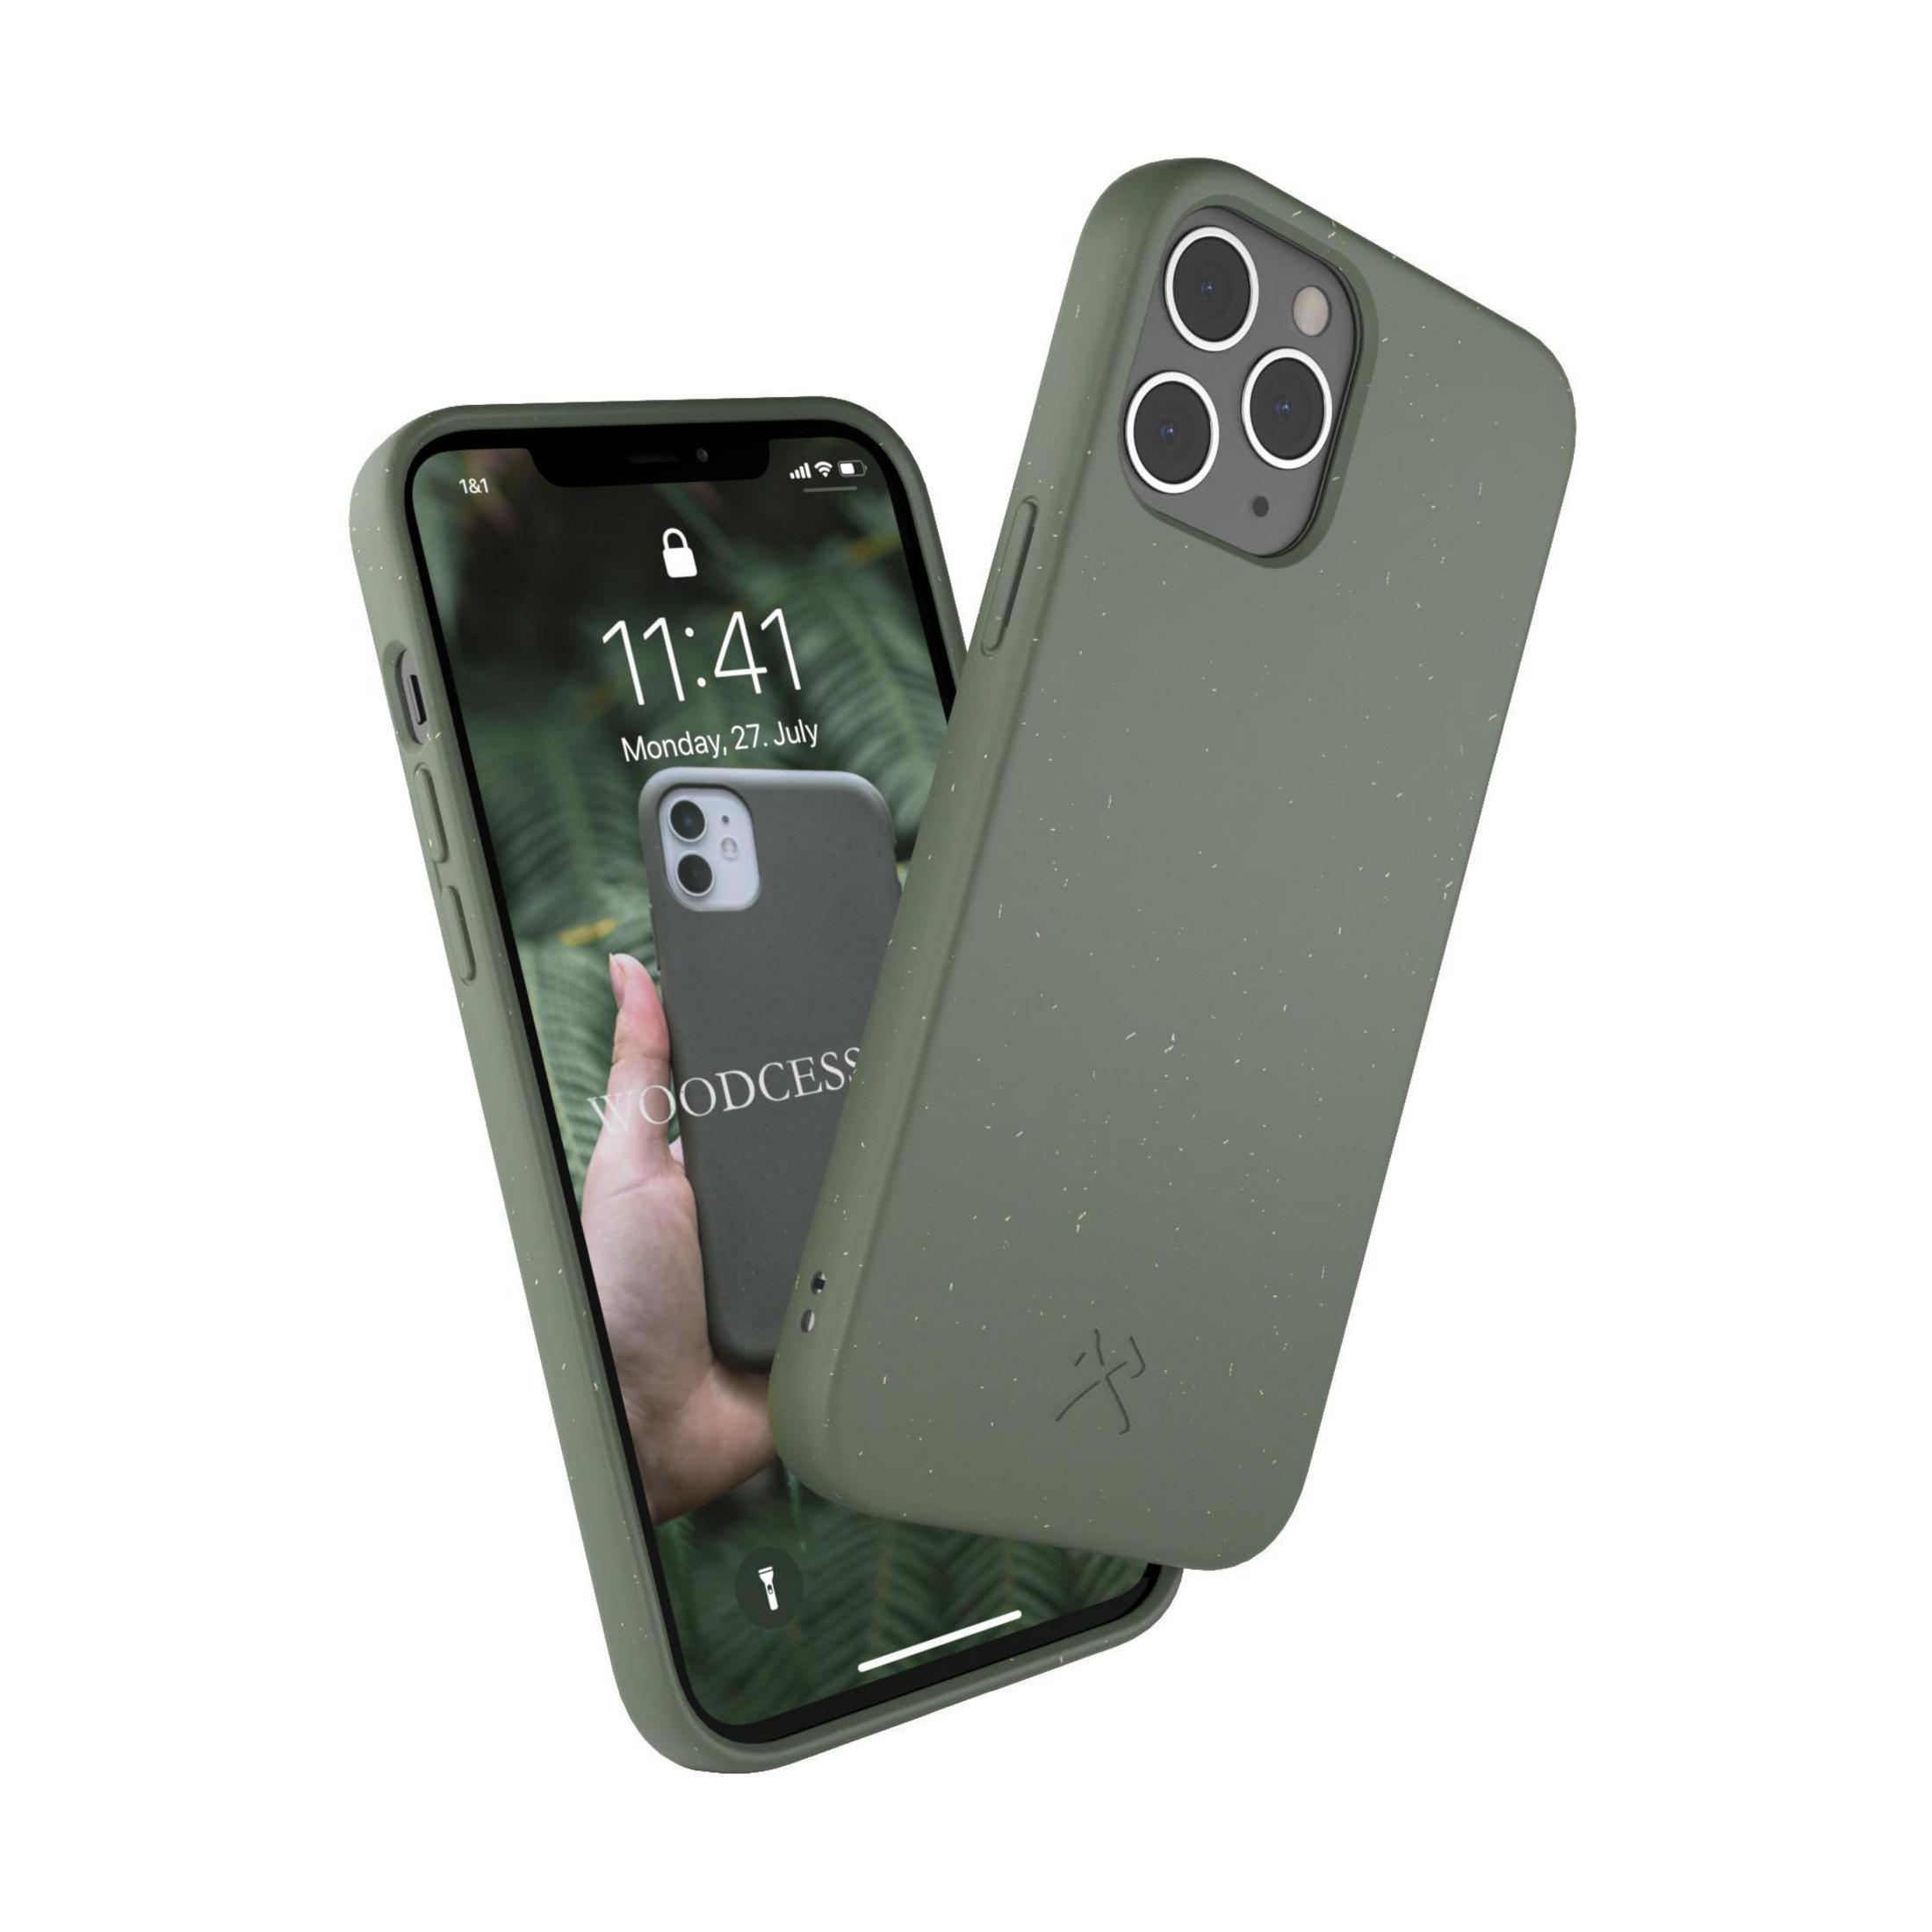 WOODCESSORIES ECO460 BIO CASE iPhone GREEN, 12 12, AM Grün Backcover, IP 12 Pro, Apple, iPhone 12 PRO